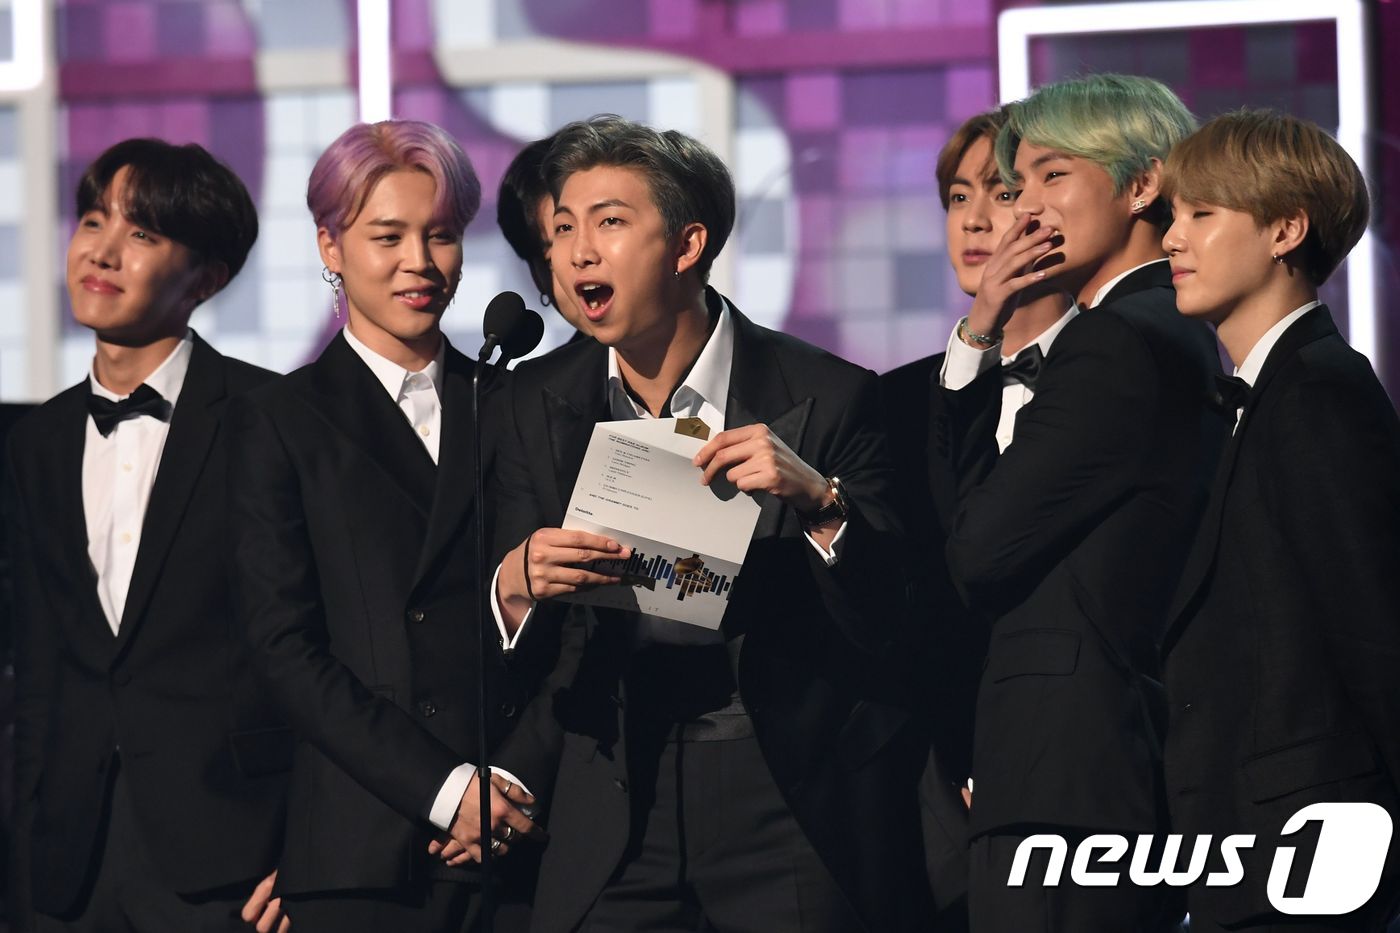 BTS attended the 61st Grammy Awards at the United States of America Los Angeles Staples Center on the 11th (Korea time).This is the first time Grammy has invited an Asia star as well as a Korean singer.BTS was awarded the Best R & B album category on the day.Although it has been on stage for a short time, it has been evaluated as having made a mark on the Grammy Awards just by leaving the prize of the important category.The Grammy Awards are the United States of America awards ceremony, but they are also awards that cover former World music.As it has been in its 61st year this year, it boasts the highest authority based on its history accumulated for decades.It is meaningful that BTS has entered the Grammy Awards even if it is not an award.It is because the first Asian singer to break the festival of their own frame and to expand the spectrum can be a hope for Asian singers.Moreover, on this day, BTS appeared as a prize winner and expressed its aspirations that we will stand on this stage again.Starting with this award, the first stage of Asia singer, as well as a new goal of being a prime minister, was set.Bae Chul-soo, who was in charge of the Grammy Awards, said, When I was broadcasting last year, I had a desire that BTS could stand on this stage soon, but it was done faster than I thought. It is a hope for young musicians by showing up on the stage of dreams.BTS entered Grammy and also wrote Triple Crown to attend the prestigious Music Awards of United States of America, the worlds largest popular music market.Earlier, BTS won the Top Social The Artist Award at the Billboard Music Awards for the second consecutive year in 2017 and 2018, and made a strong impression on World people, including winning the Payborit Social The Artist Award at the American Music Awards last year.BTS has also appeared in the Grammy Awards, which are well-known for being conservative, and has made a decisive first step toward promoting K-pop beyond their music and moving to the mainstream.The members said through their agency, I have said that I want to attend the Grammy Awards on various occasions, but I could not imagine that I would actually be here.I am very honored to attend the Grammy Awards today. I am happy and happy to be able to enjoy the festival with the World The Artists.It was a really dreamy moment - thank you again to Amy (ARMY, Fandom) for giving me an unforgettable gift.I would like to thank many people who watched live on World and the Grammy Awards for inviting me to the awards ceremony. 